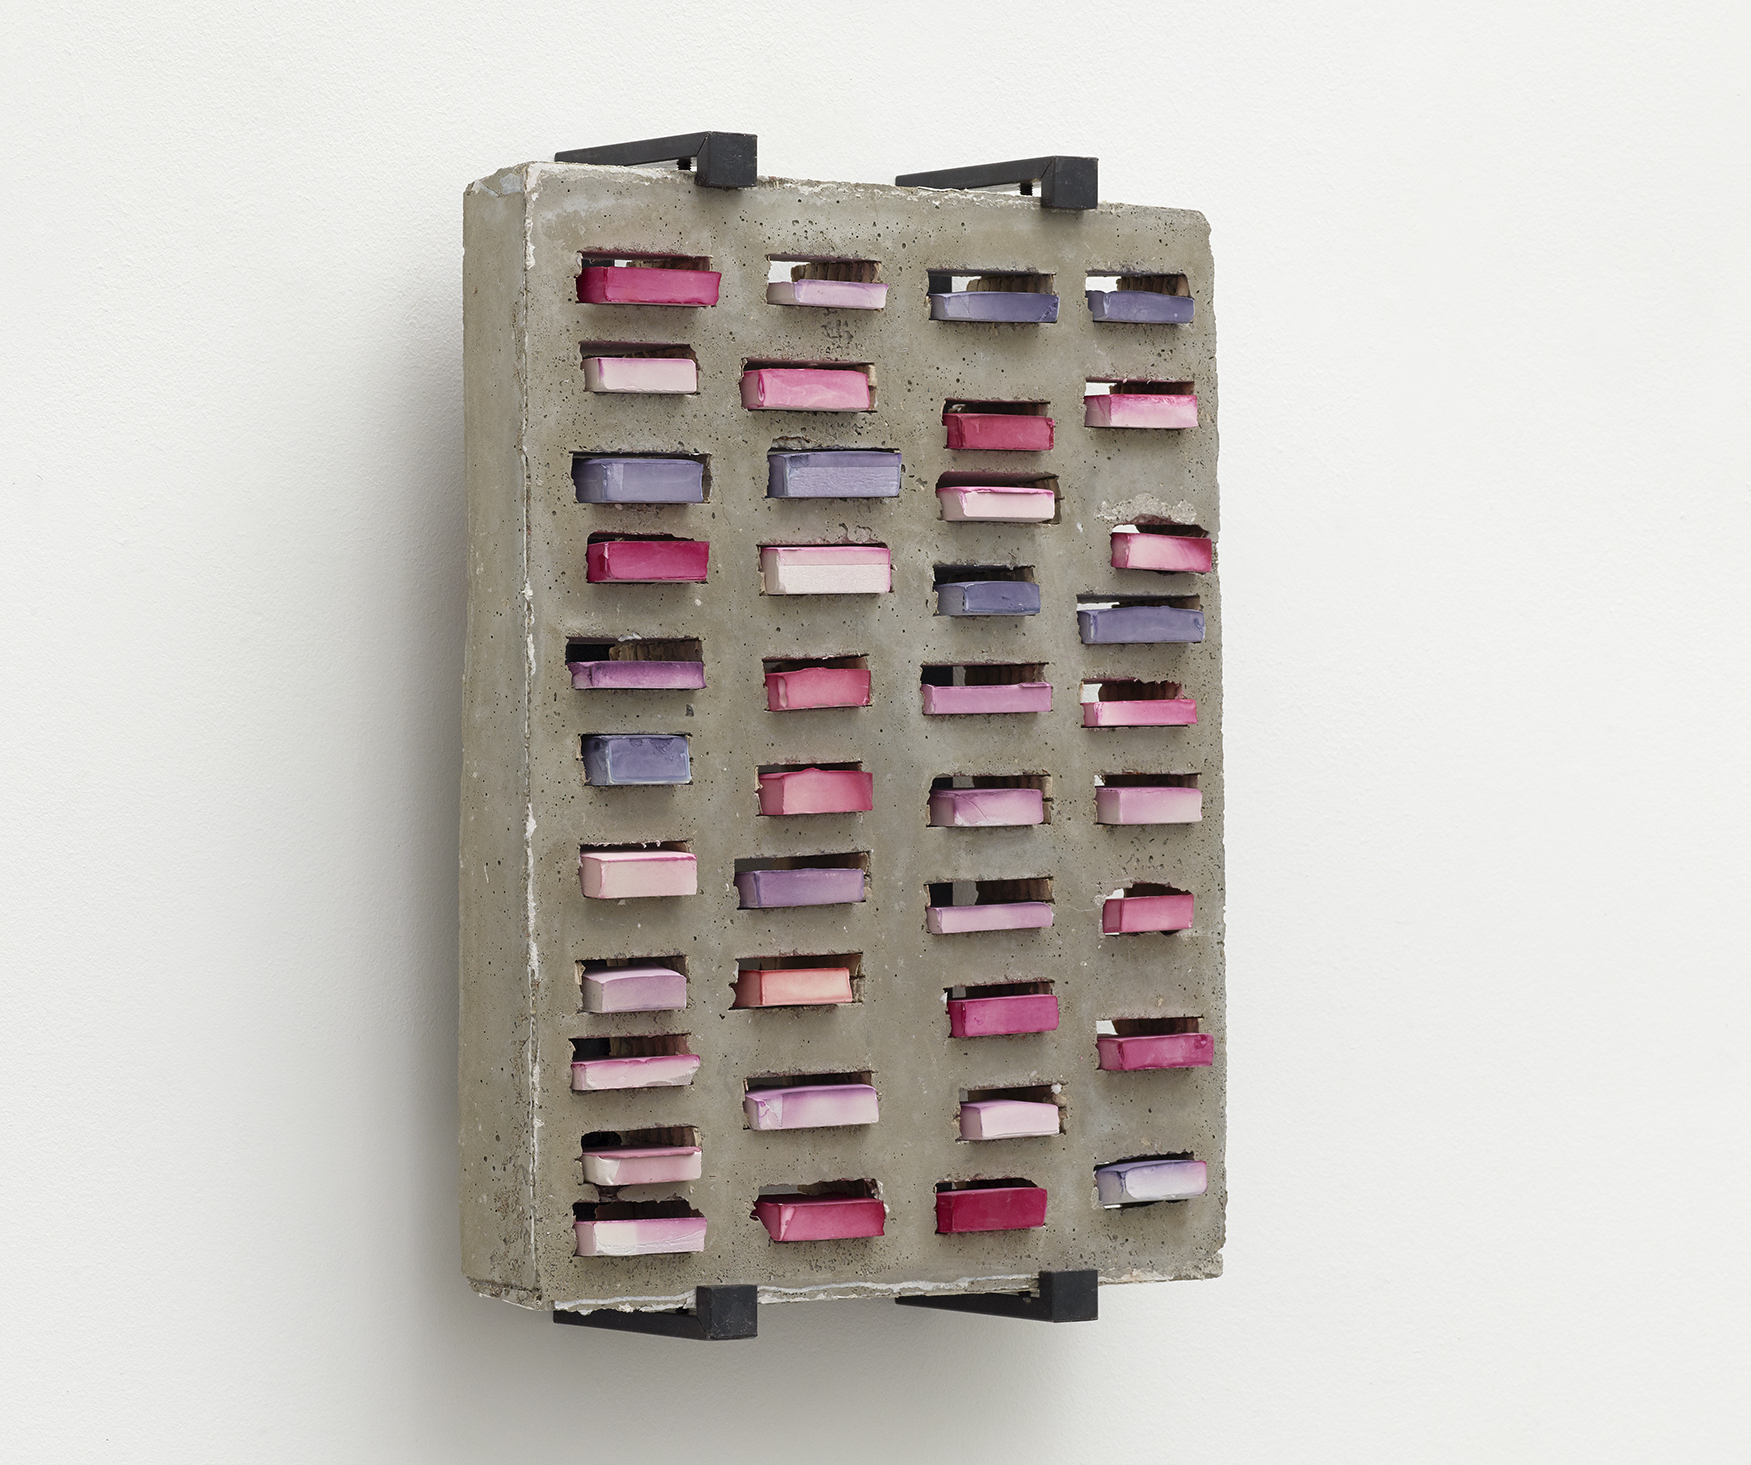 Tove Storch Untitled, 2020 Concrete, colored plaster, steel 49 x 36,5 x 11,5 cm (19,29 x 14,37 x 4,53 in) A certificate of authenticity signed by the artist must follow the work